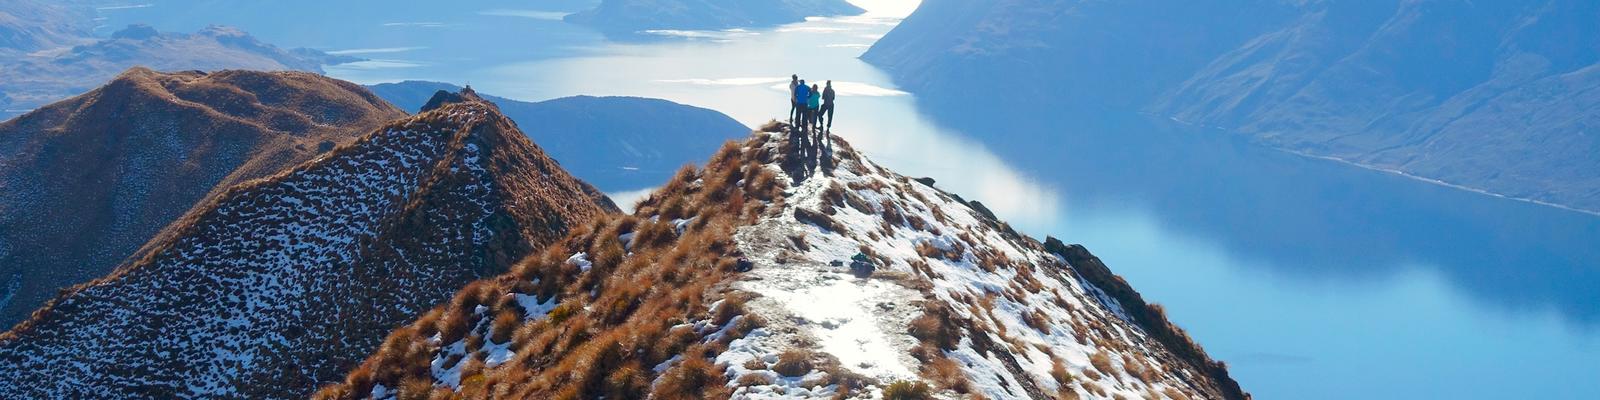 Distant view of hikers standing on a cliff against lake during winter, Queenstown